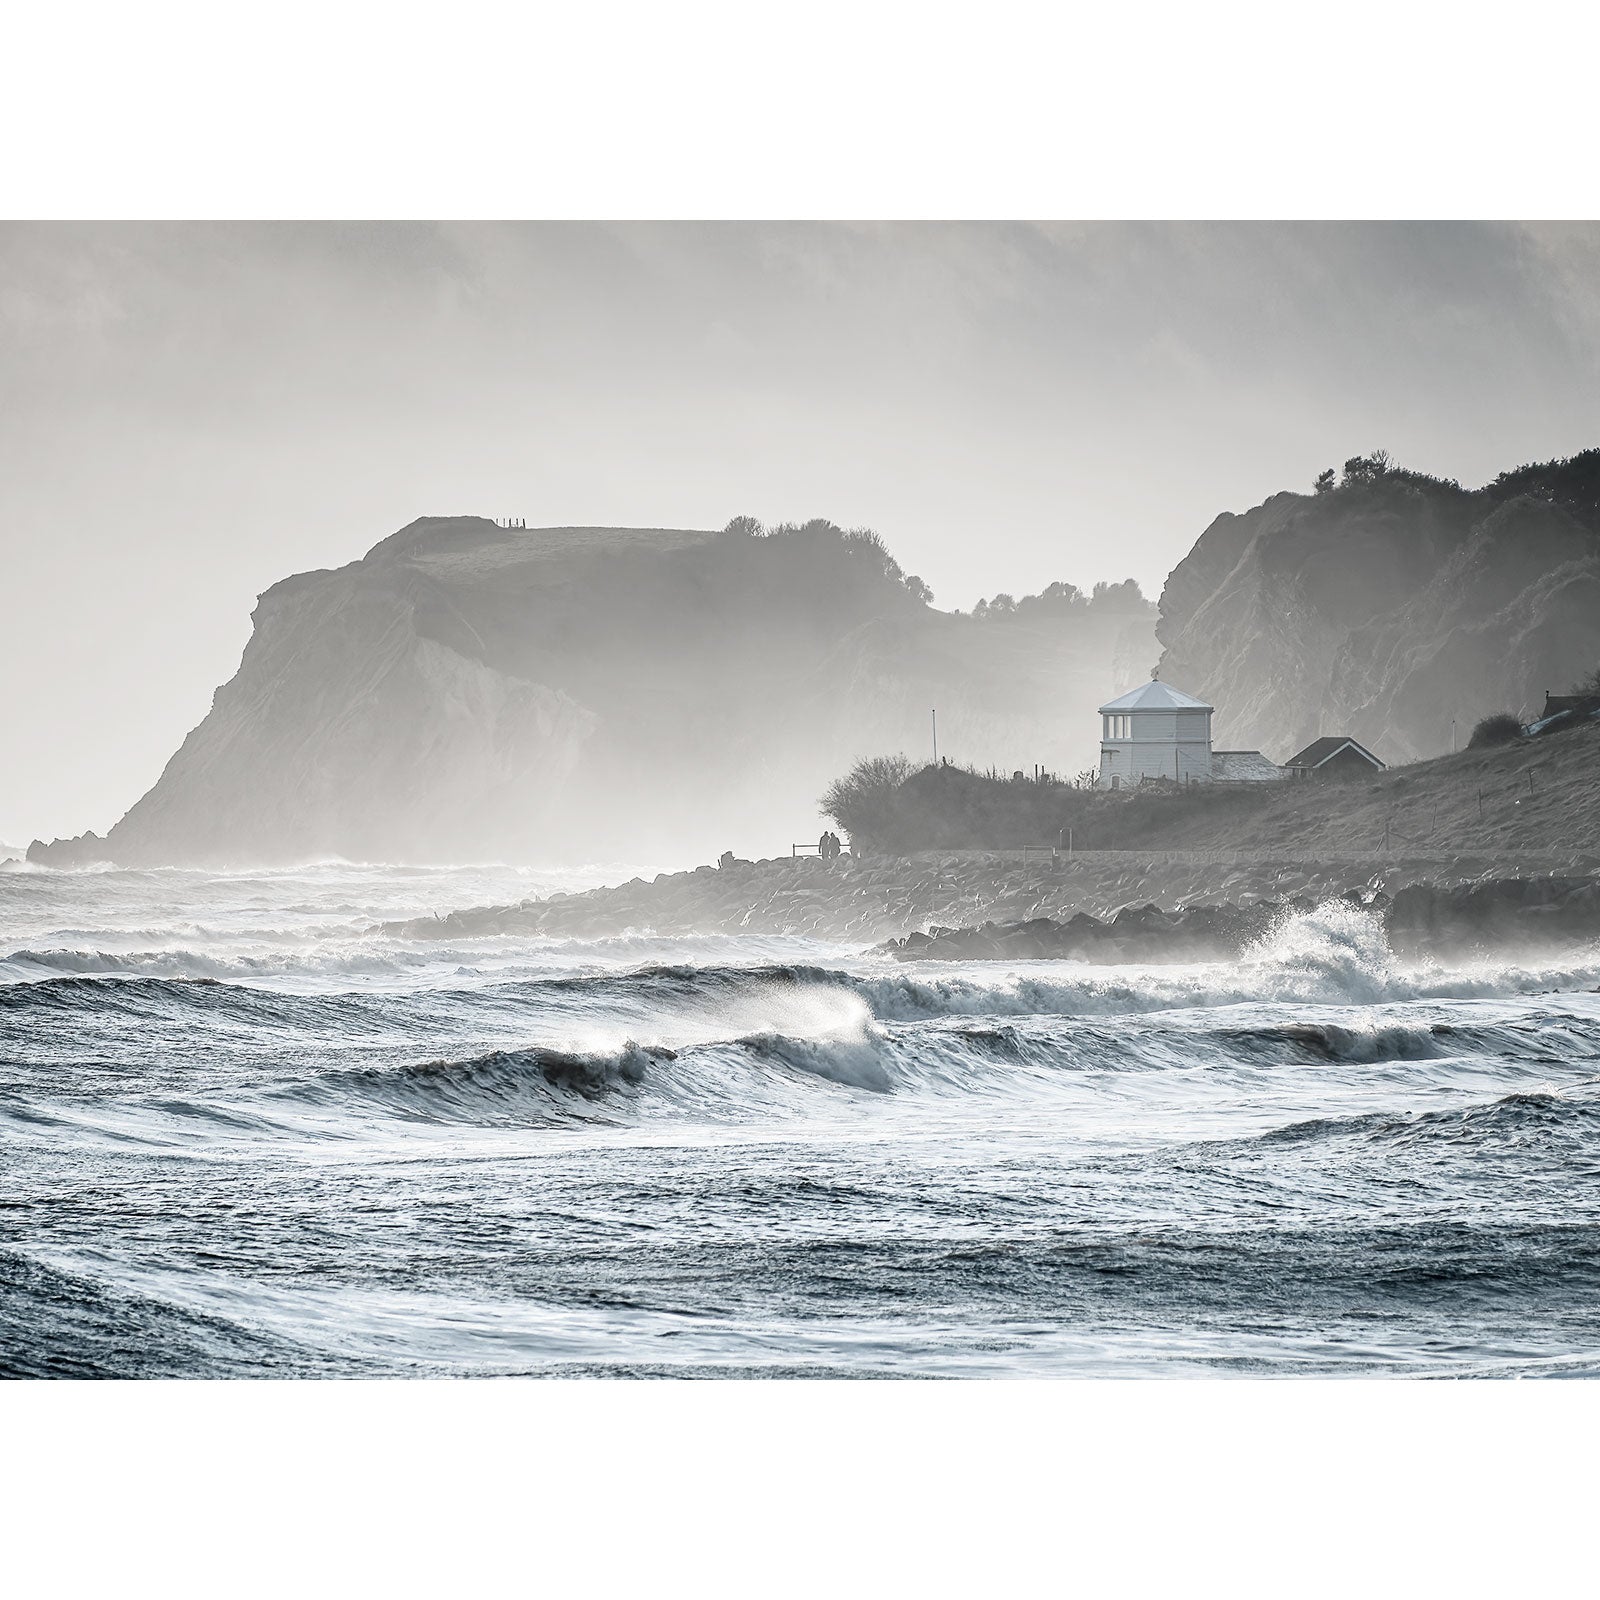 Coastal landscape with choppy waves and a white building against a backdrop of cliffs shrouded in mist on the Isle of Gascoigne featuring Woody Point from Ventnor by Available Light Photography.